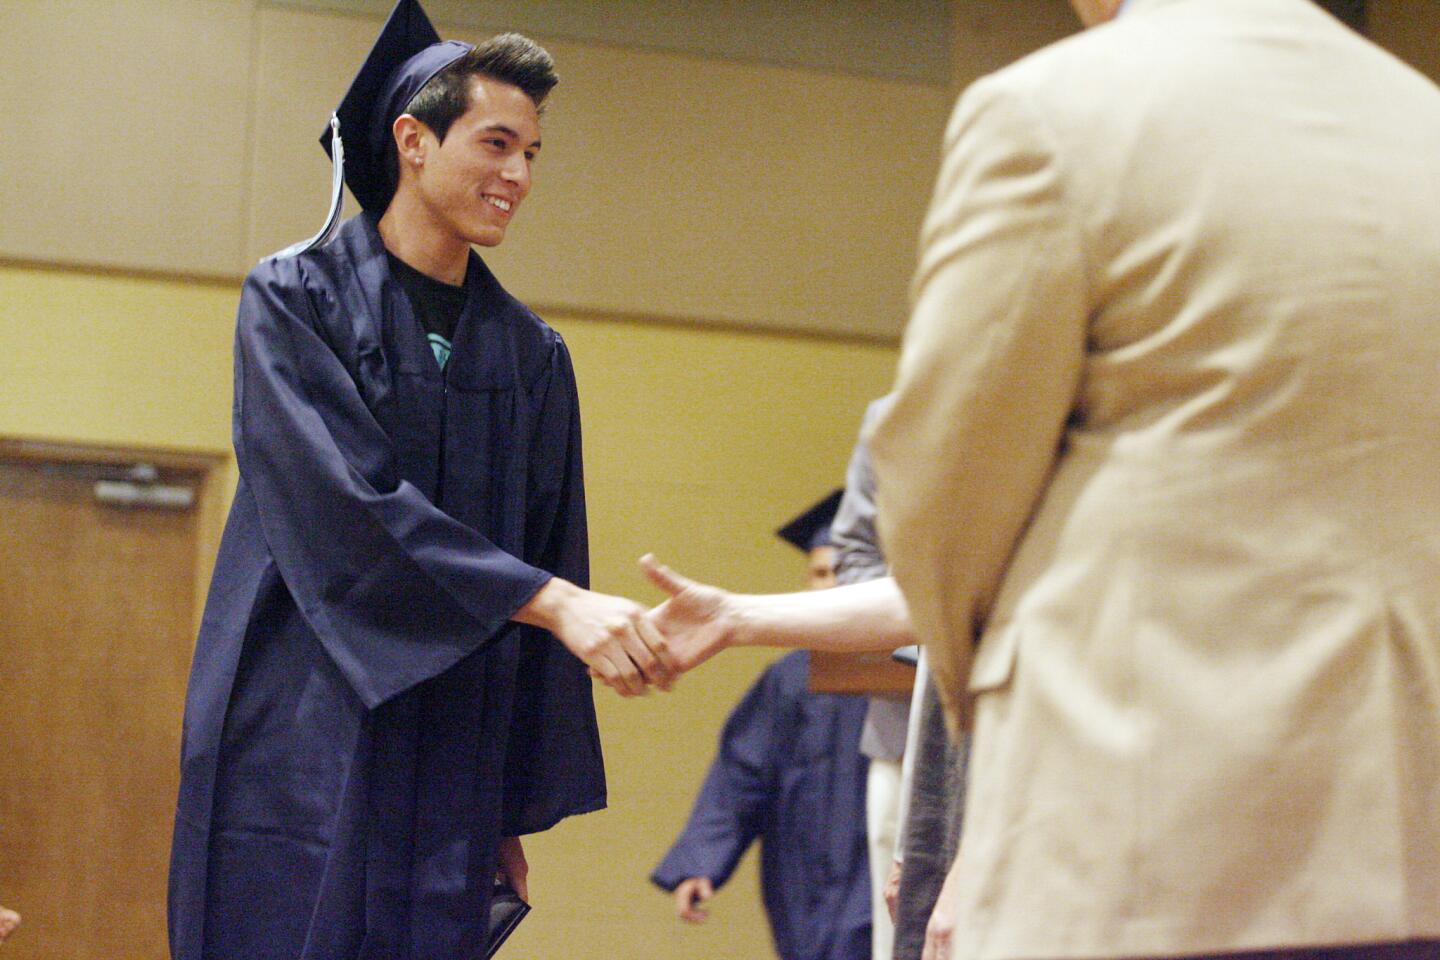 Christian Dominguez receives his diploma during his graduation ceremony at United Methodist Church in Glendale on Thursday, July 19, 2012.